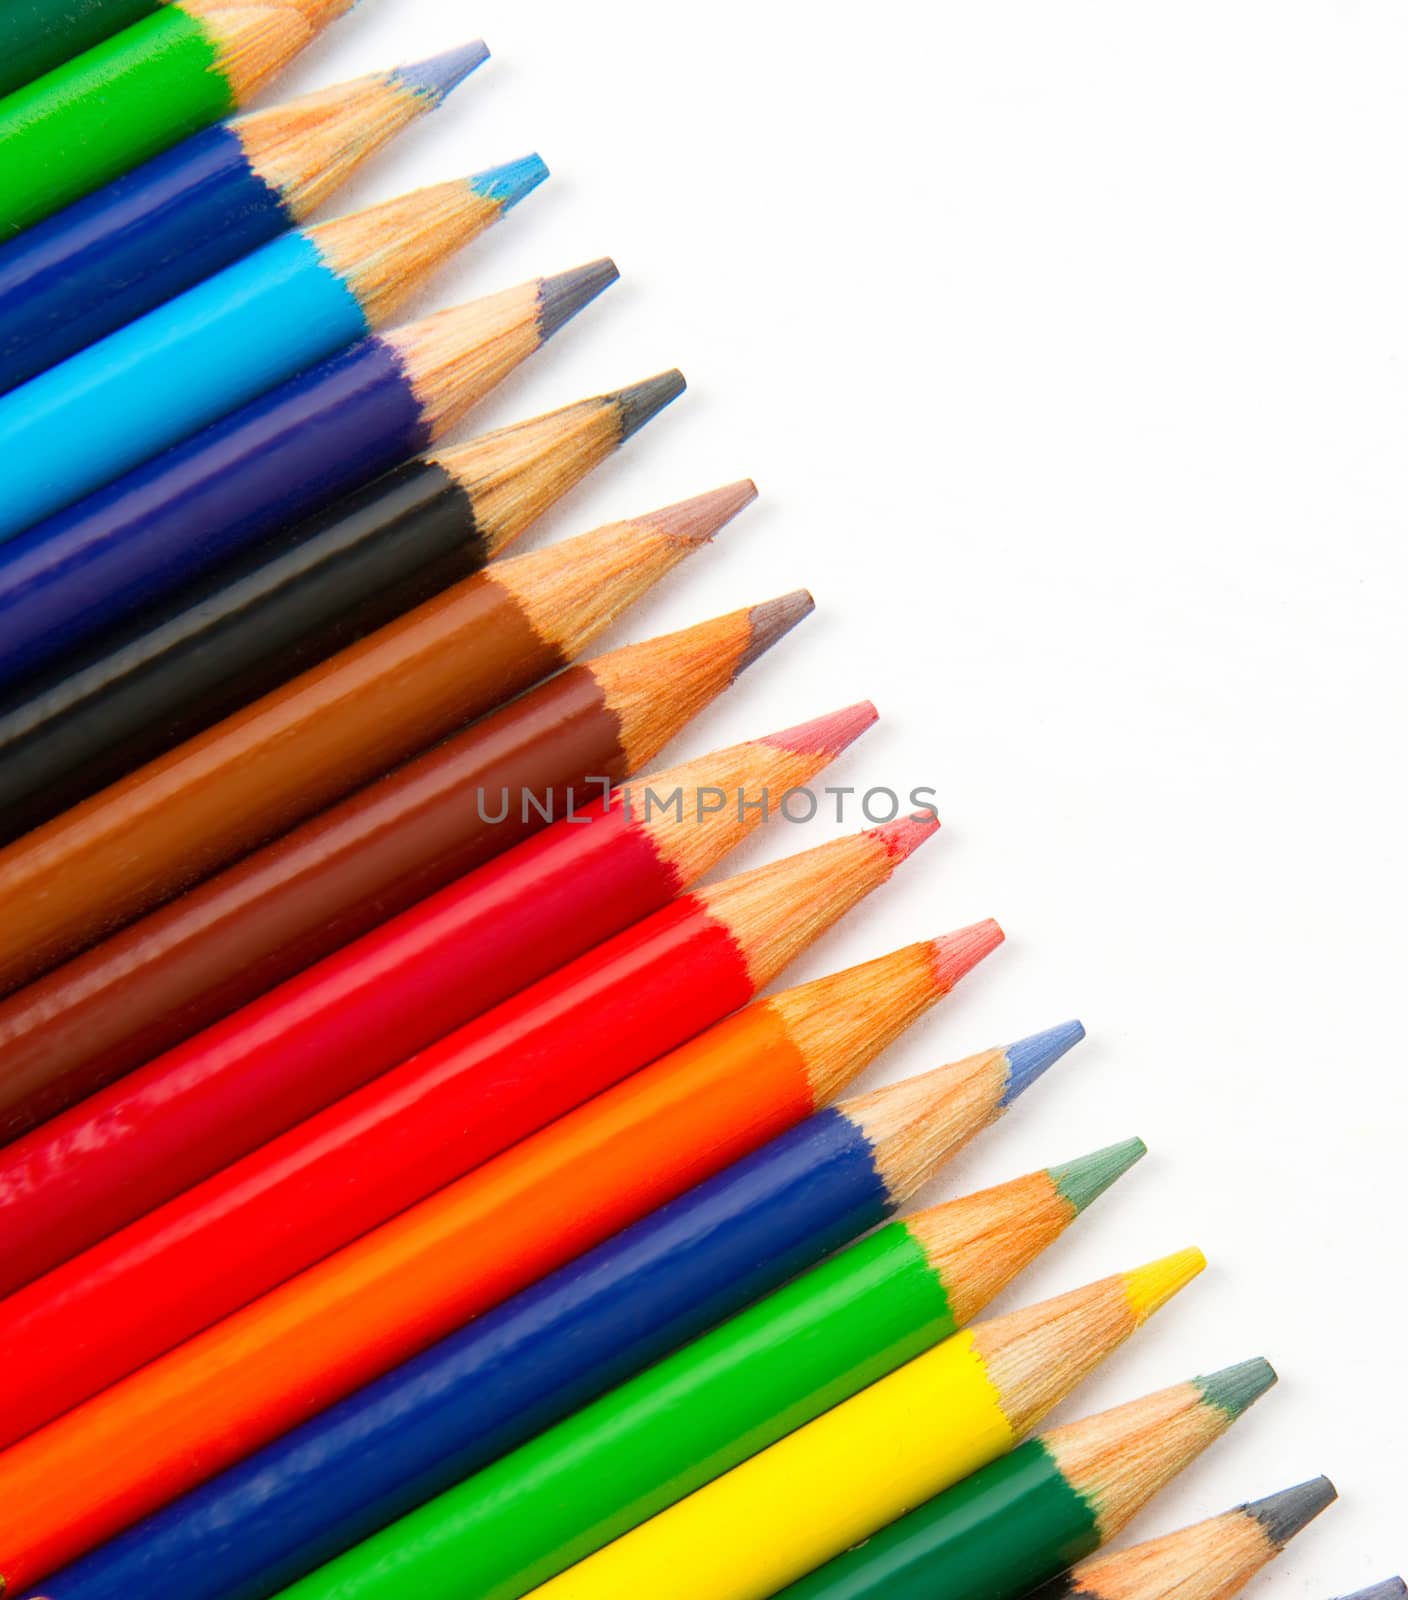 Brightly Colored Art Pencils Artist Supply Lead Writing Instrument by ChrisBoswell